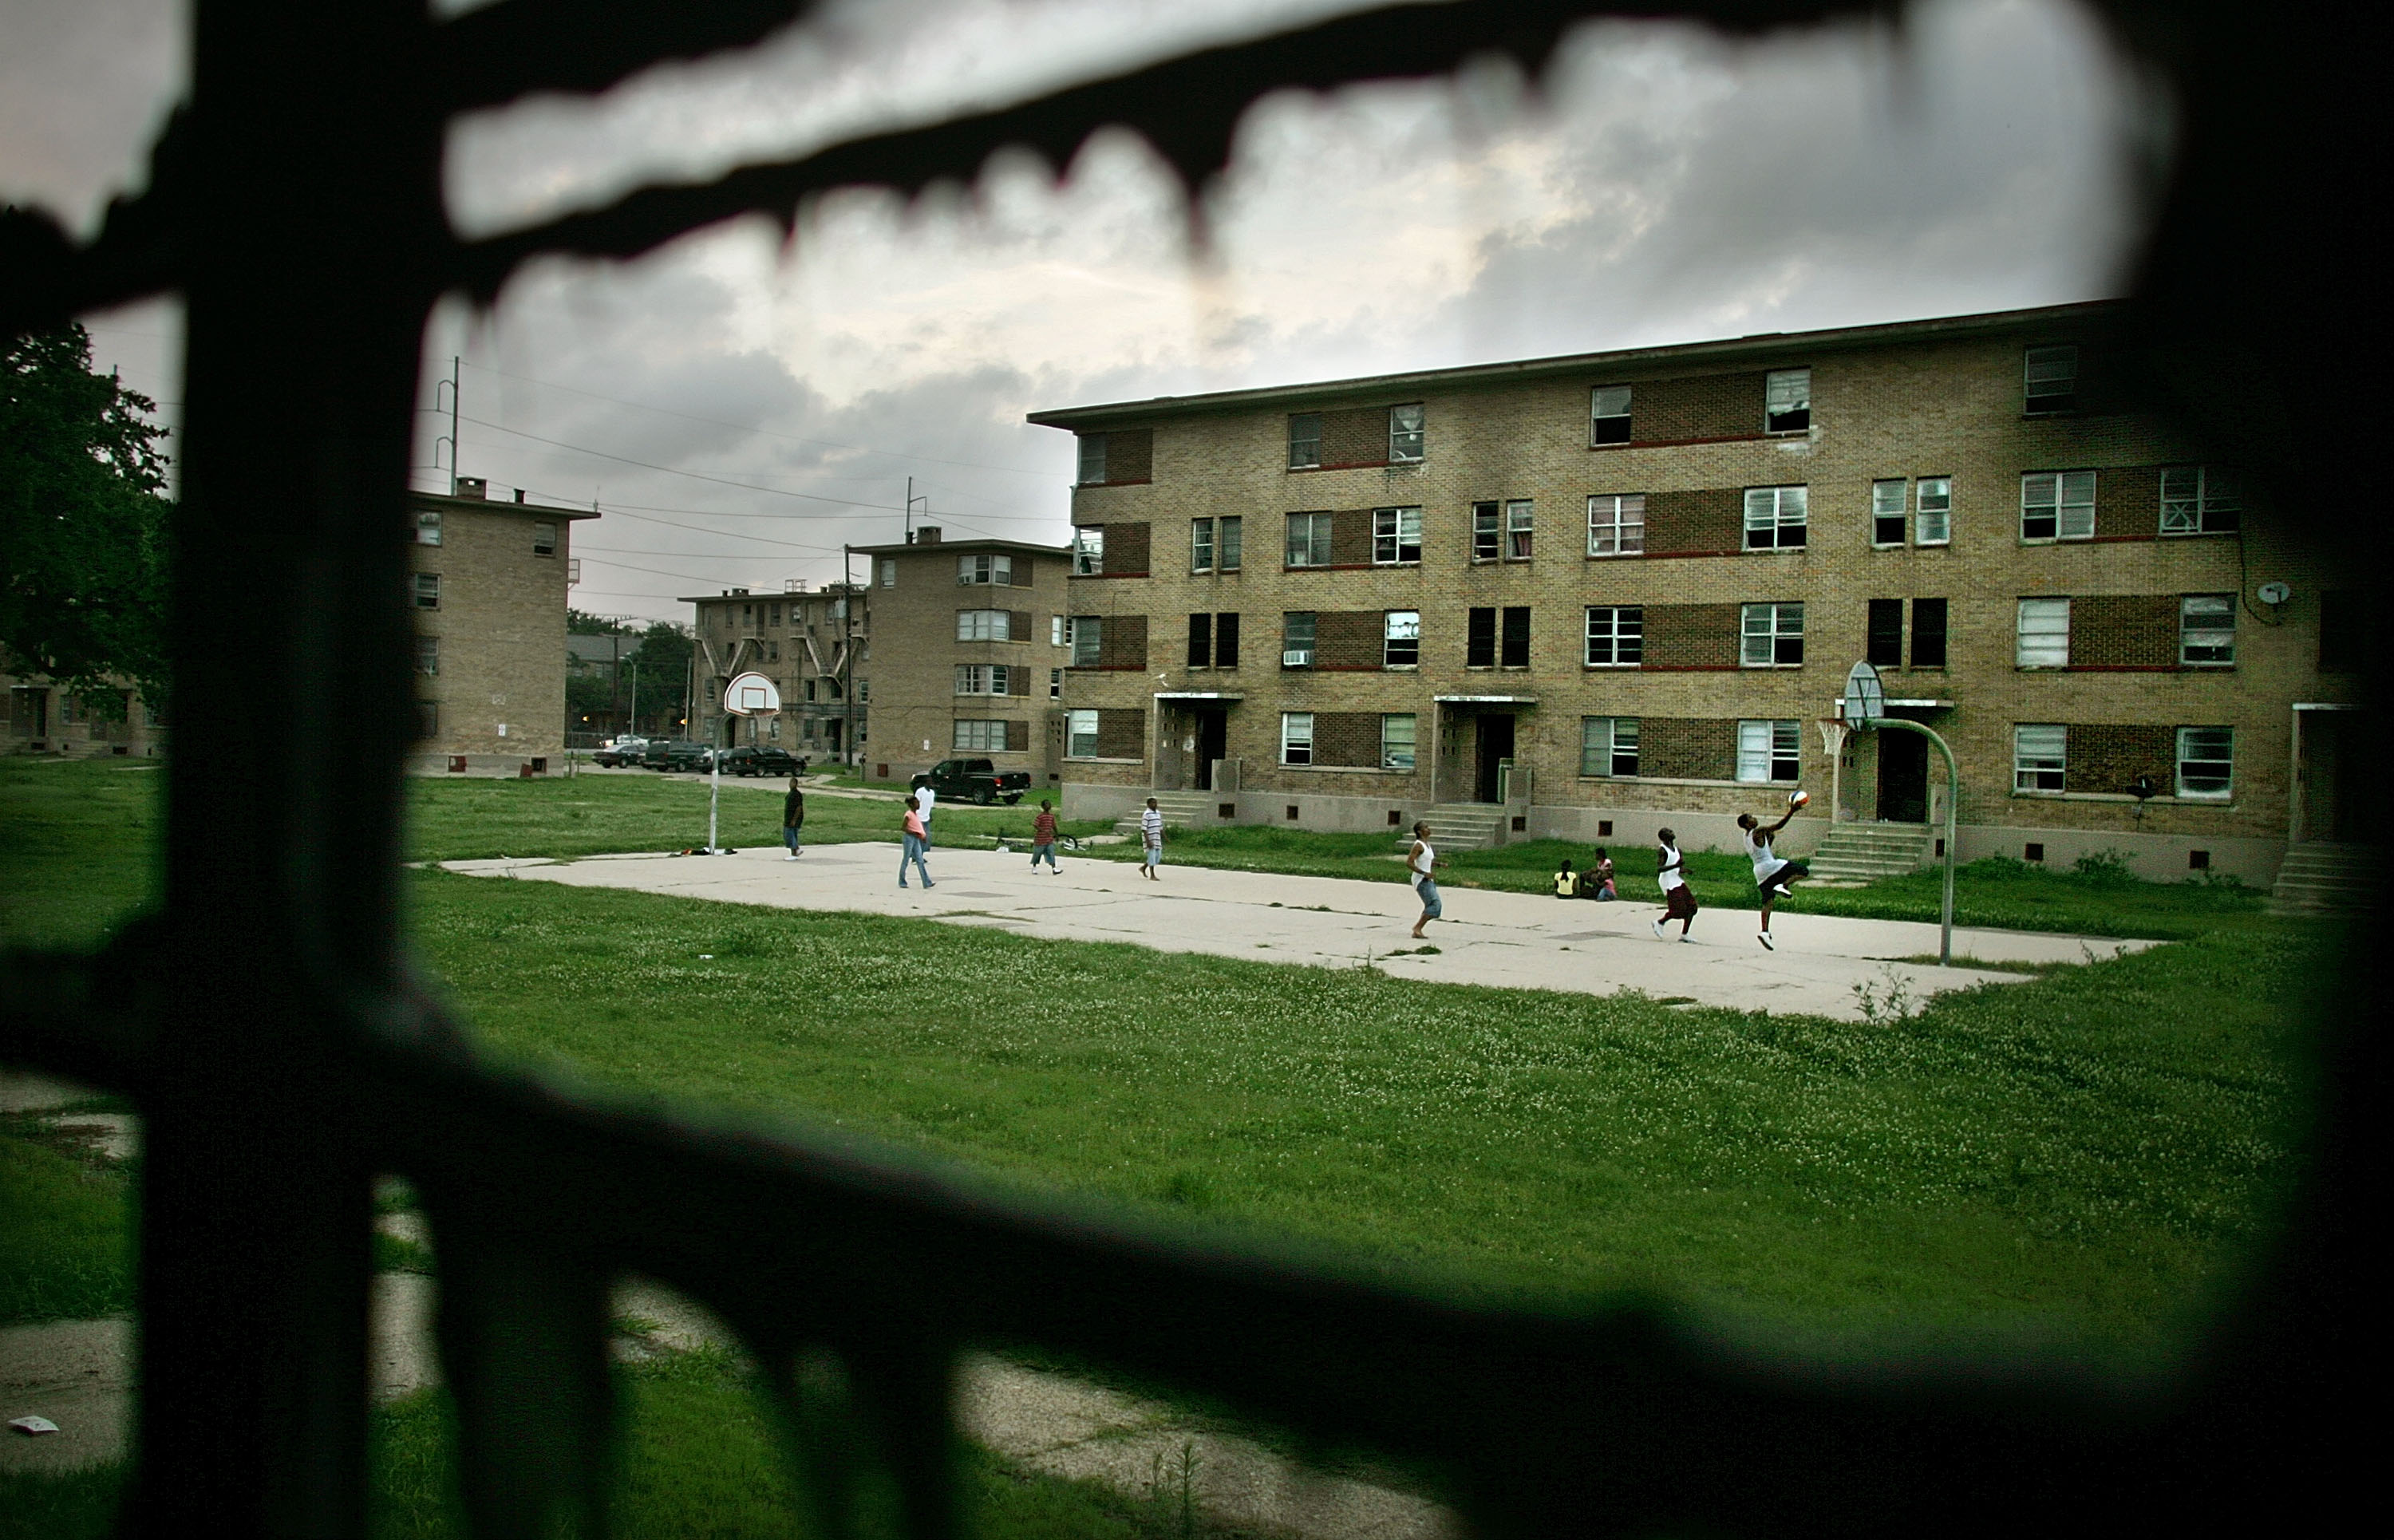 NEW ORLEANS - JUNE 07: B.W. Cooper housing project residents play basketball in front of storm damaged apartments in the complex June 7, 2007 in New Orleans, Louisiana. Before Hurricane Katrina, B.W. Cooper held about 1,000 families and was the city's largest housing project, but it is now more than 80 percent empty. Around 10,000 public housing residents in New Orleans have been unable to return to their apartments because of storm damage. The U.S. Department of Housing and Urban Development plans to tear down B.W. Cooper and other major New Orleans housing projects and replace them with mixed income developments. (Photo by Mario Tama/Getty Images)